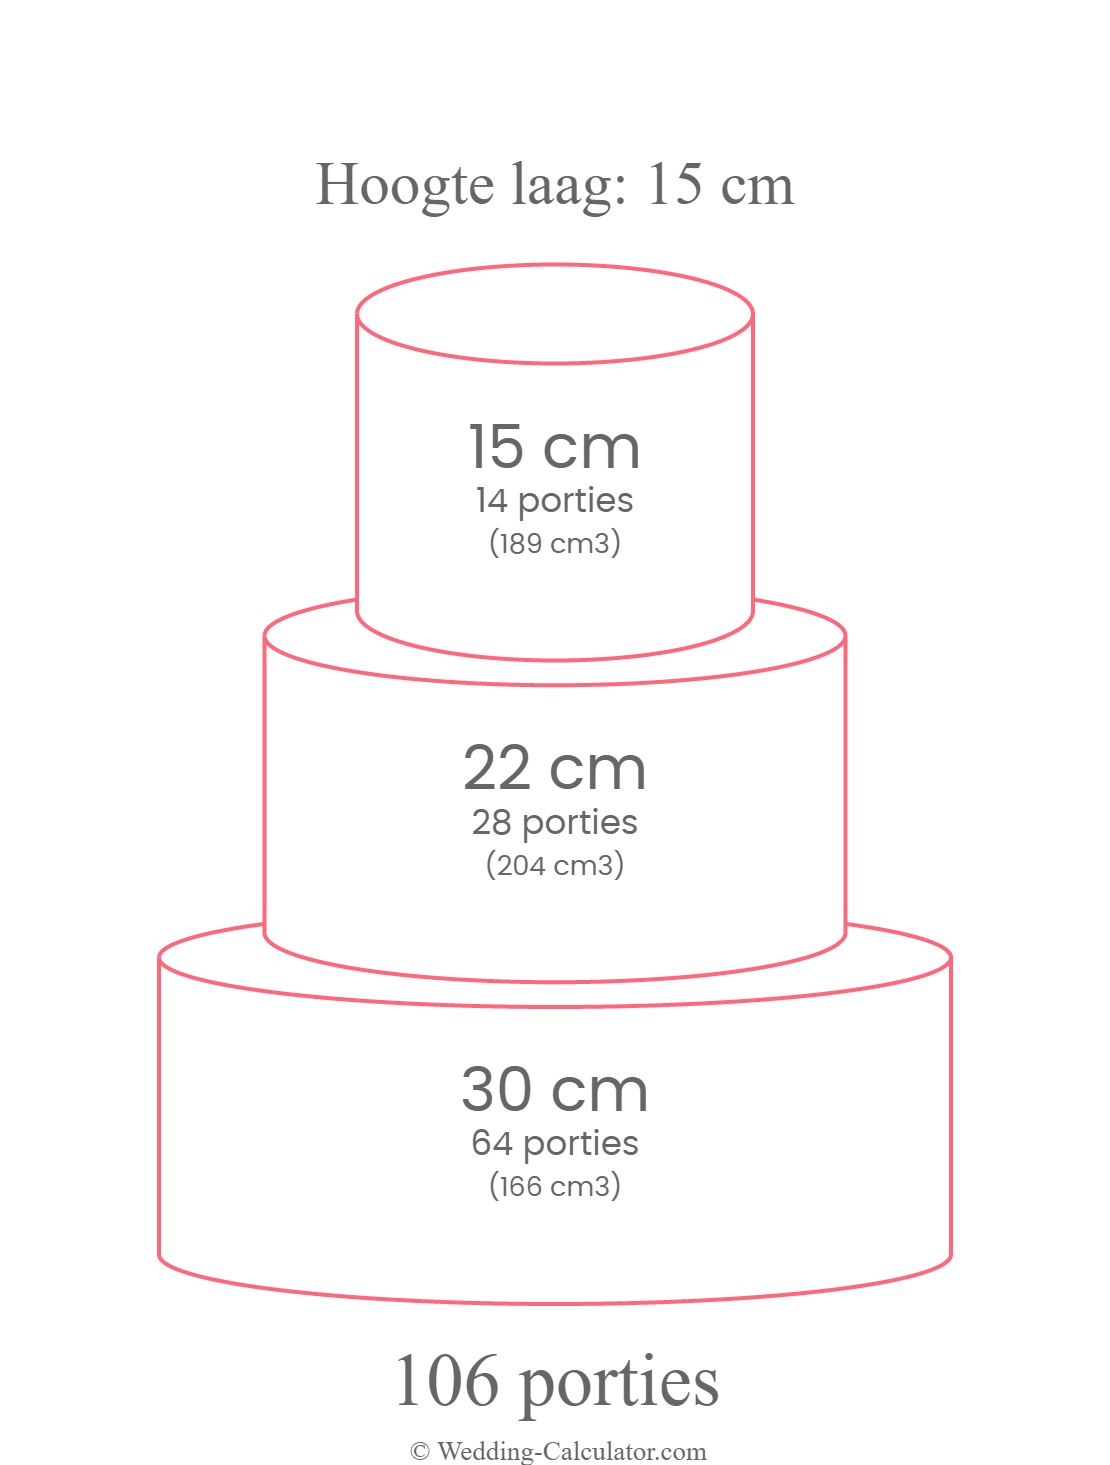 Servings chart for a round 3 tier wedding cake for 106 servings with 30 cm, 22 cm & 15 cm diameter tiers